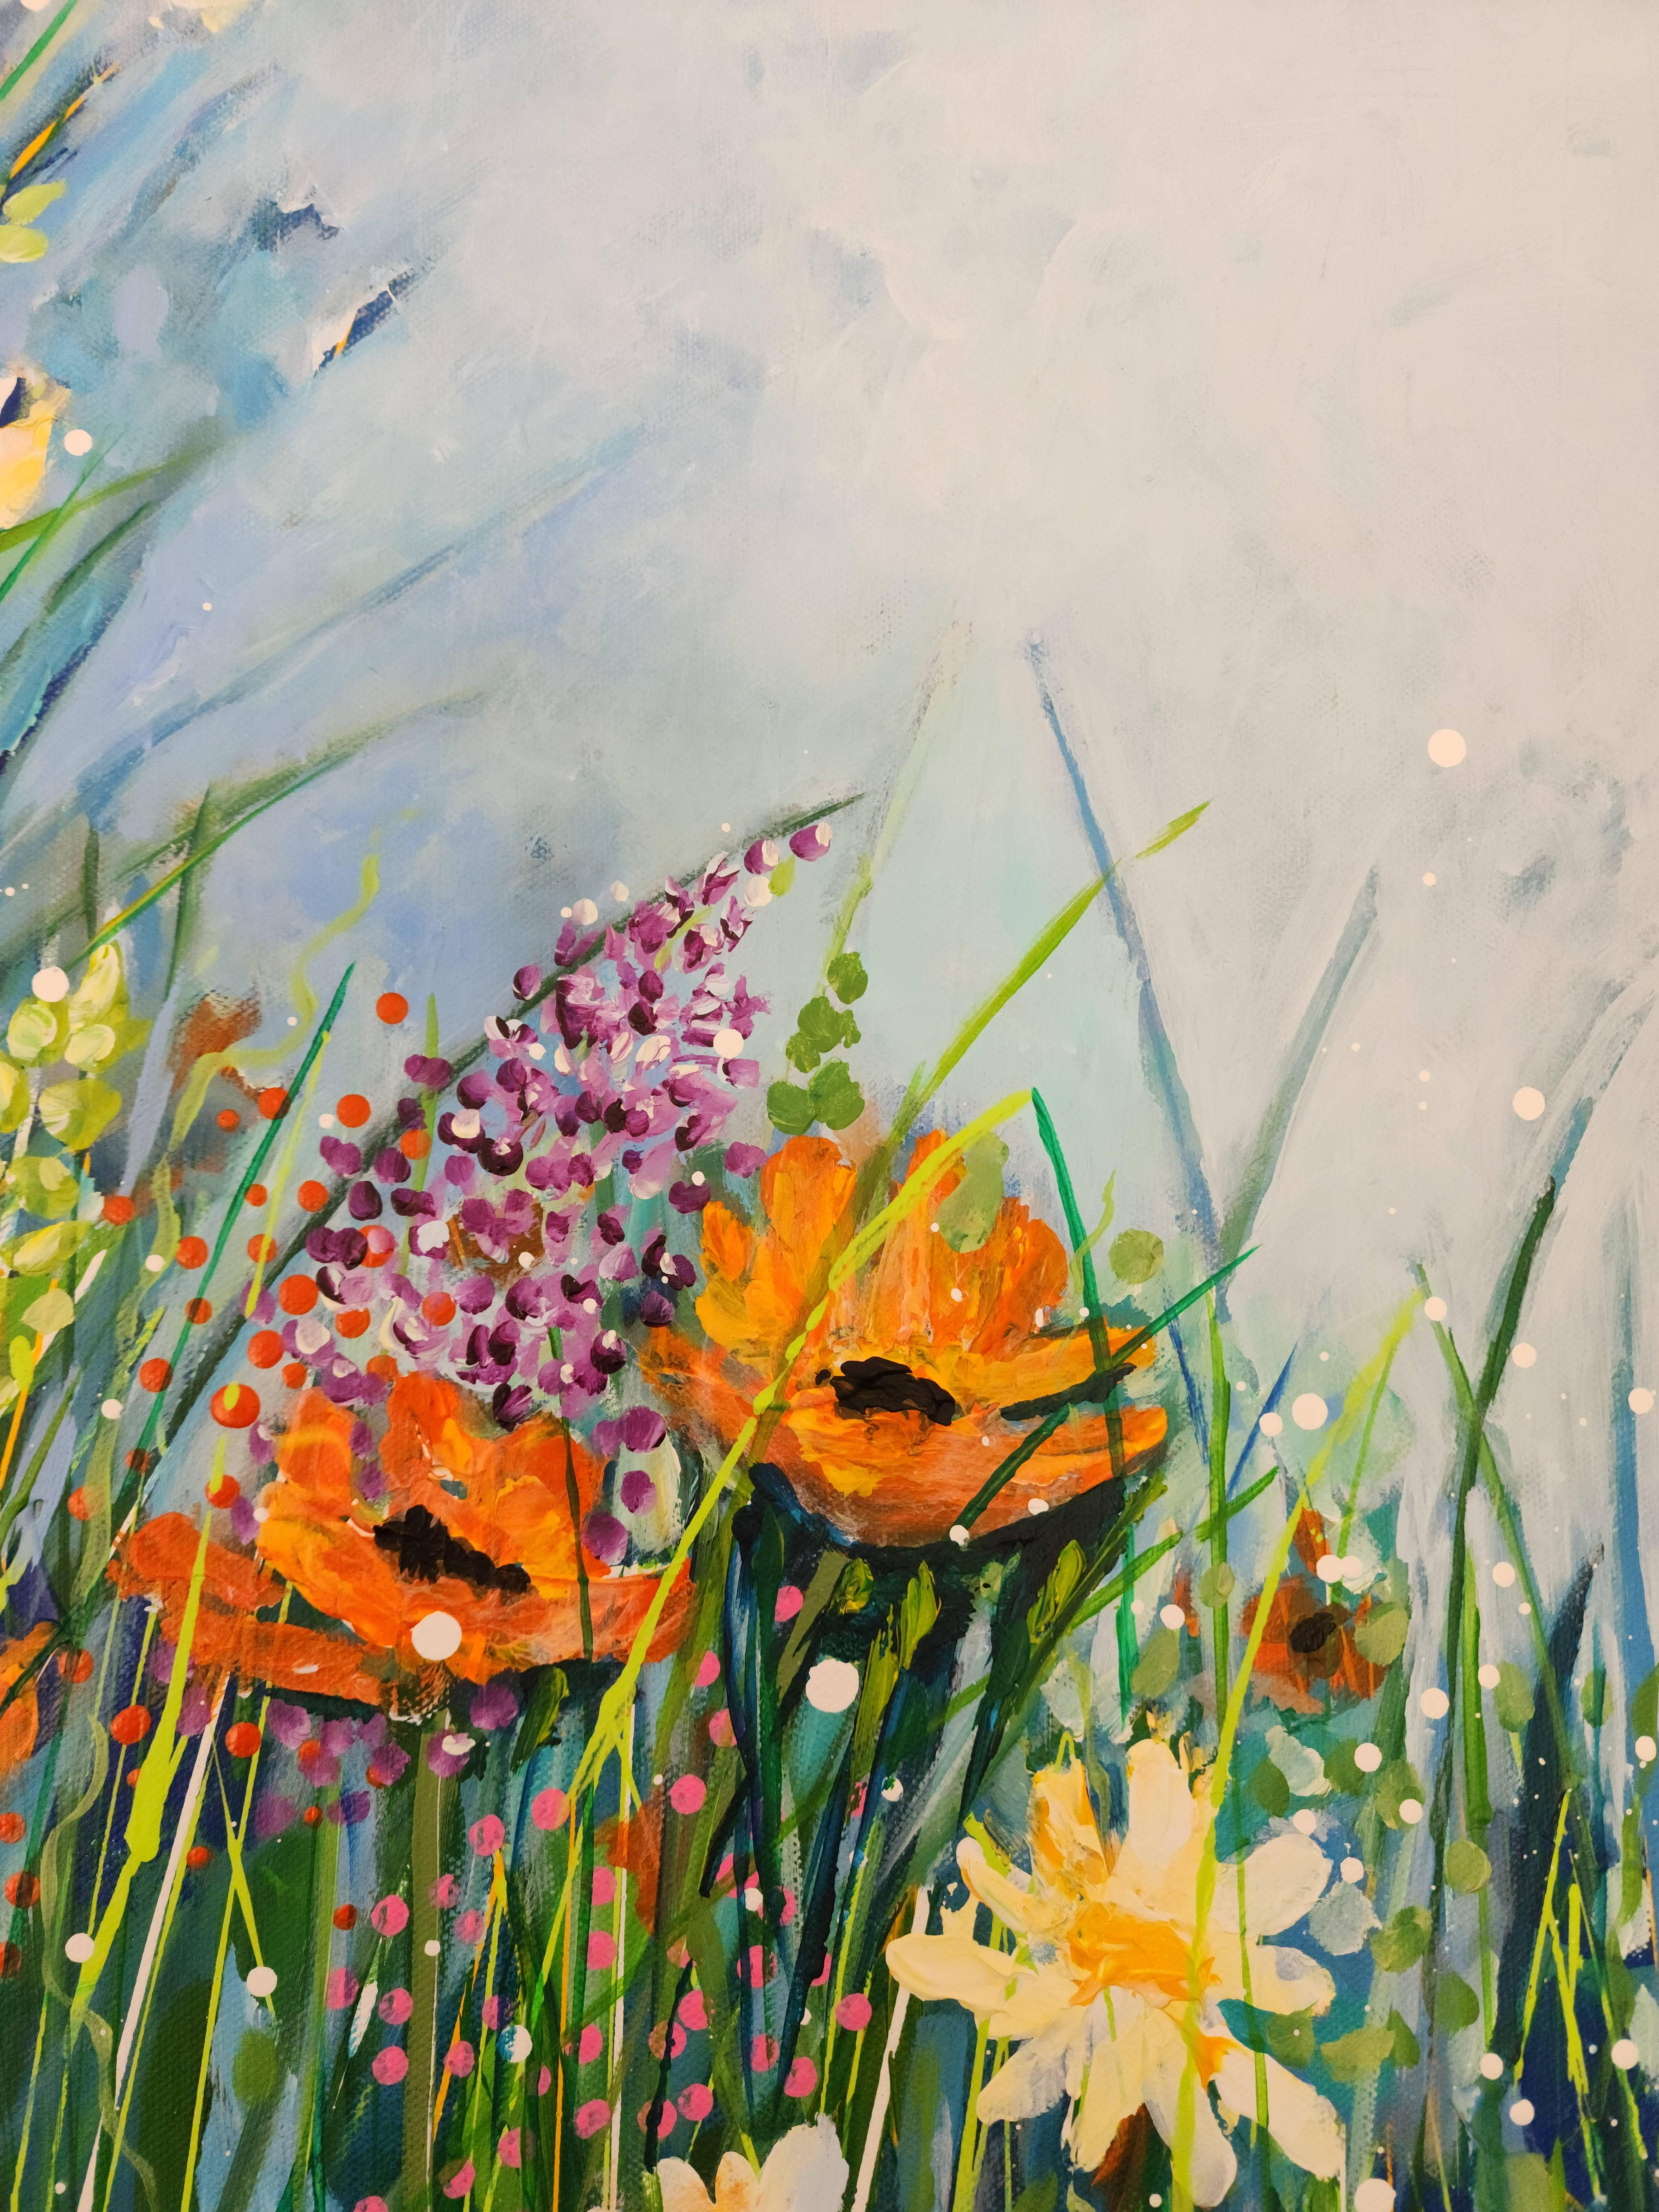 In flower fields of Dreams - Nature Meadow Stillness Beauty Contemporary Color 6